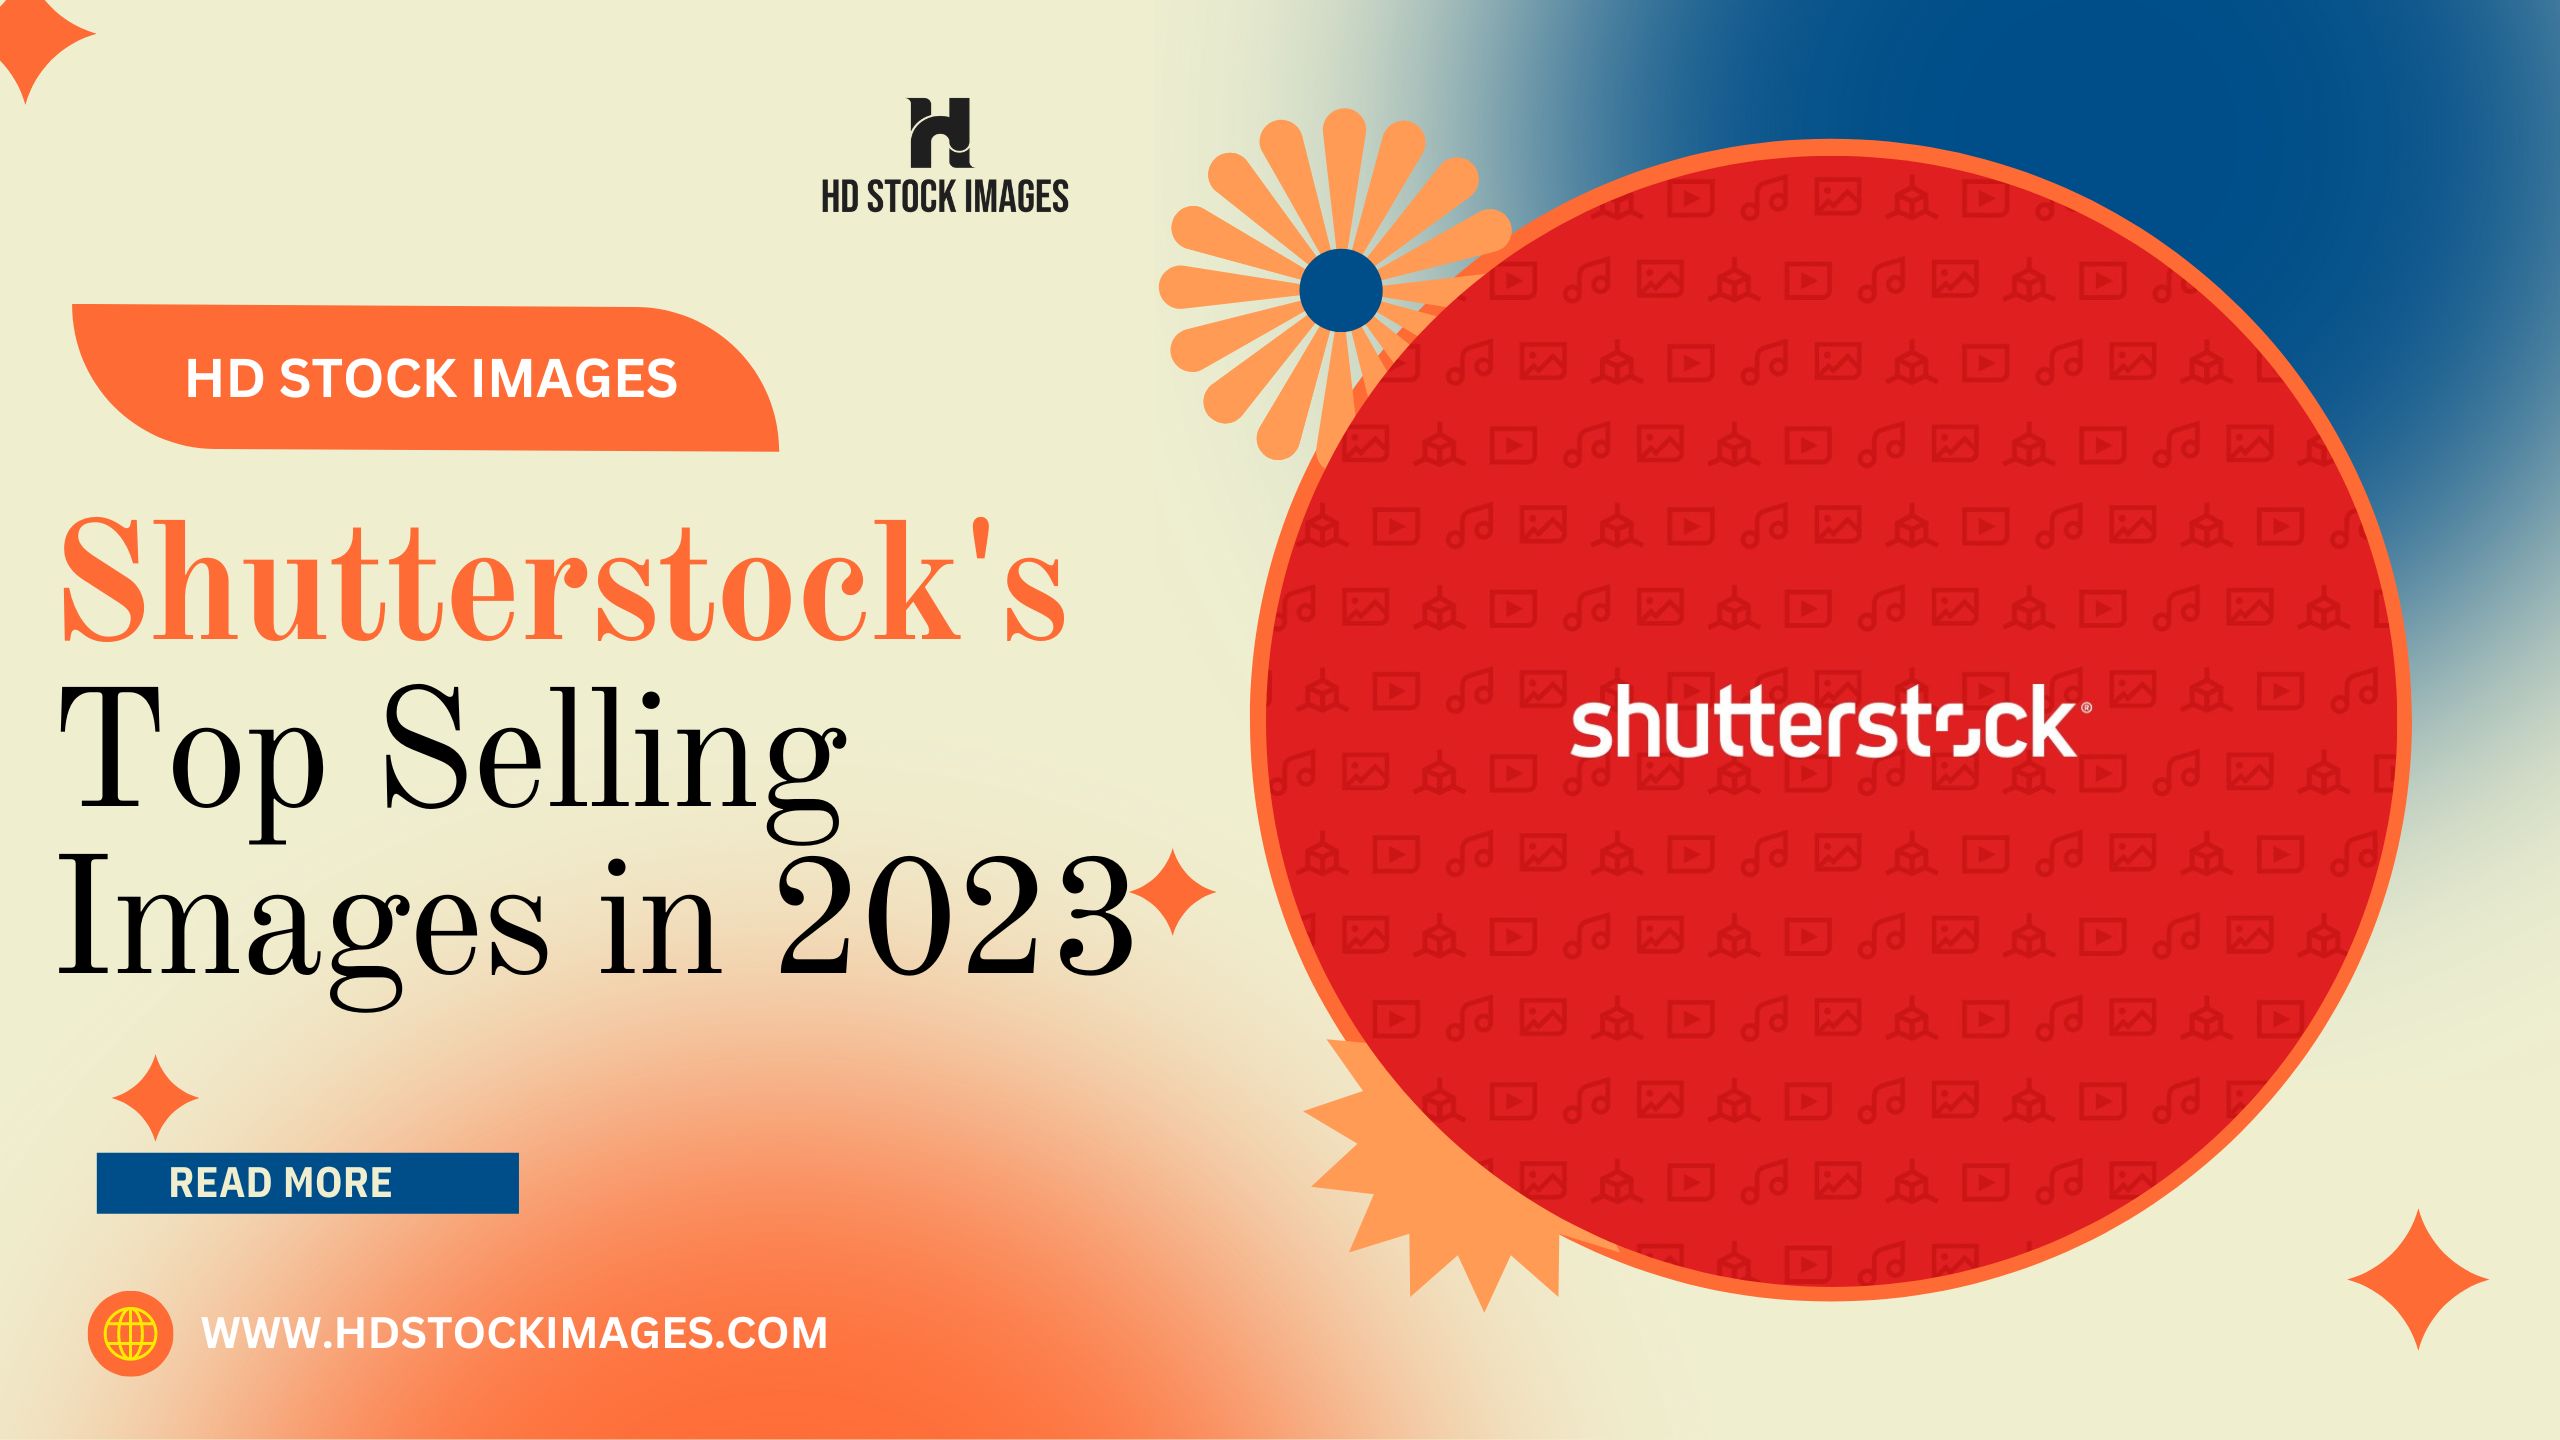 an image of Shutterstock's Top Selling Images of 2023: Predicting the Next Wave of Popular Content